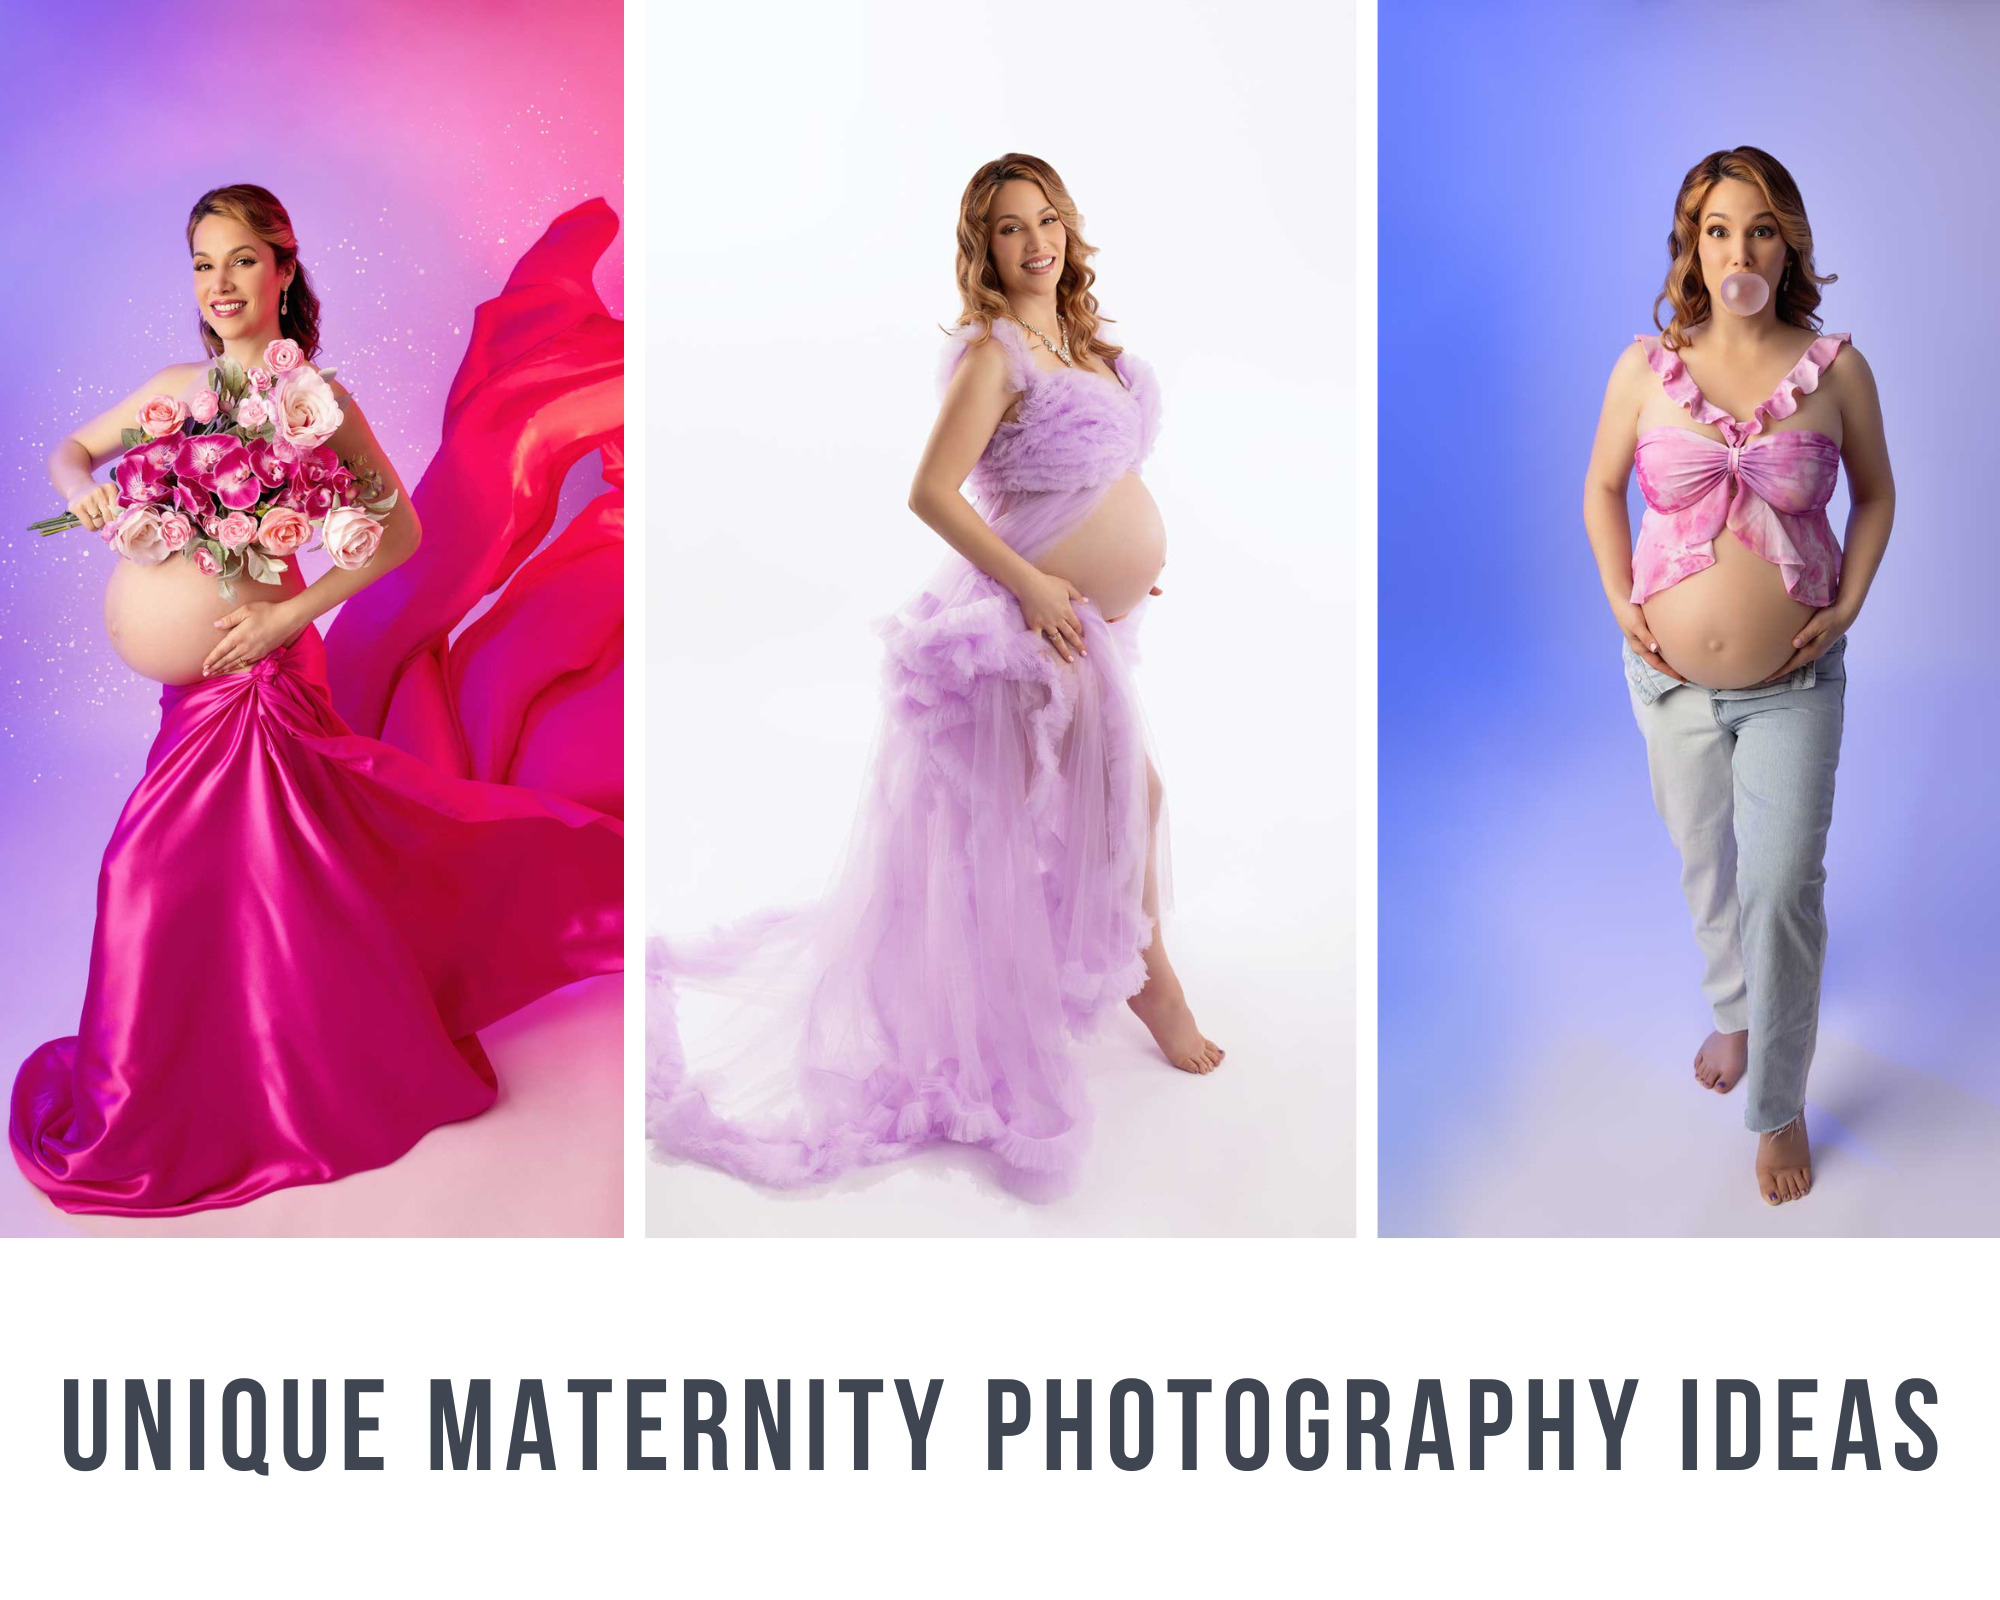 Unique Maternity Photography Ideas That Will Make You Smile